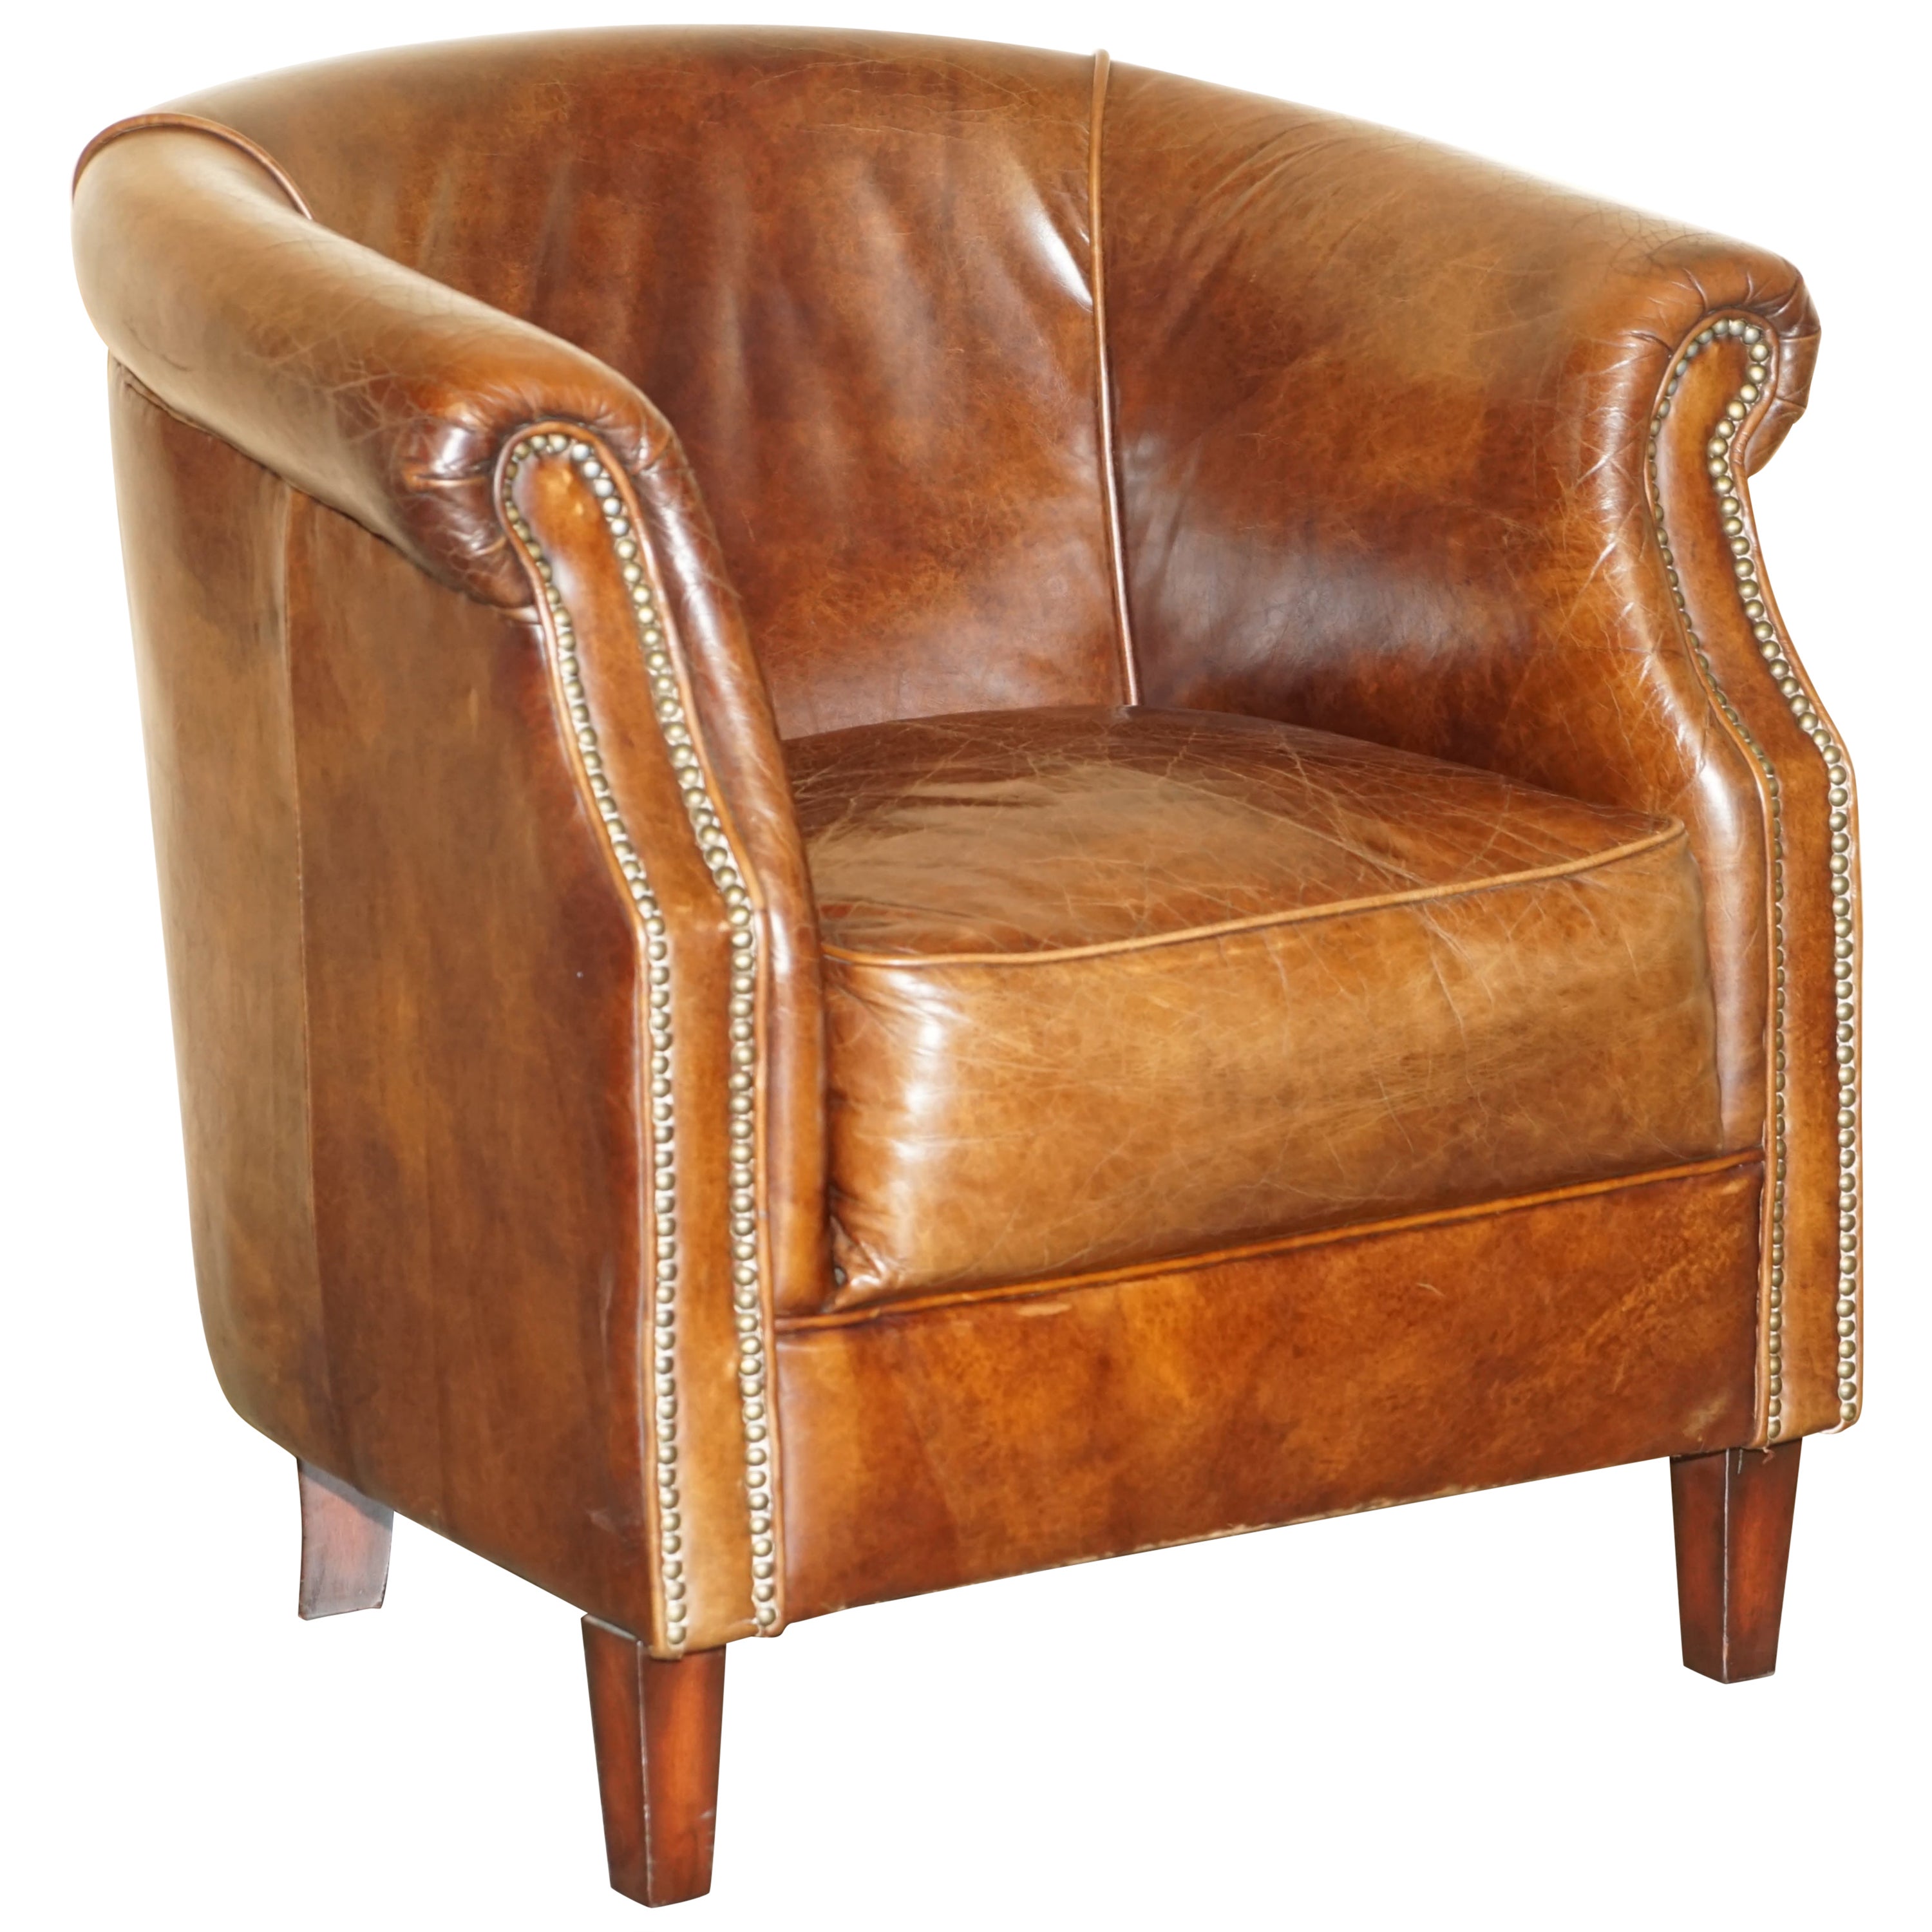 AGED HERiTAGE BROWN LEATHER BIKER TAN CLUB TUB ARMCHAIR MUST SEE LOVELY PATINa!! im Angebot